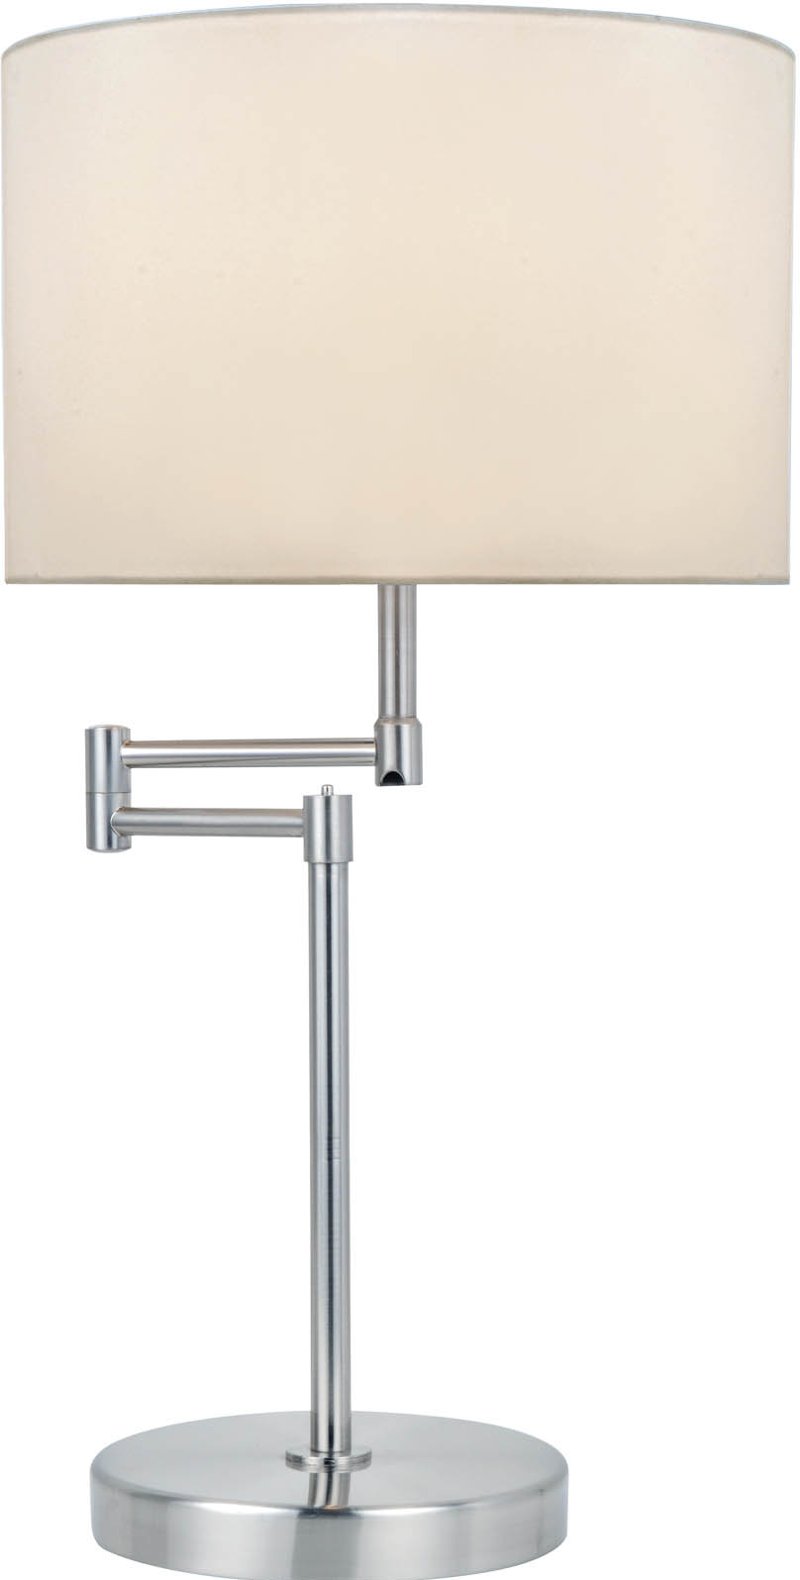 Swing Arm Table Lamp Durango Rc Willey, Swing Arm Table Lamp